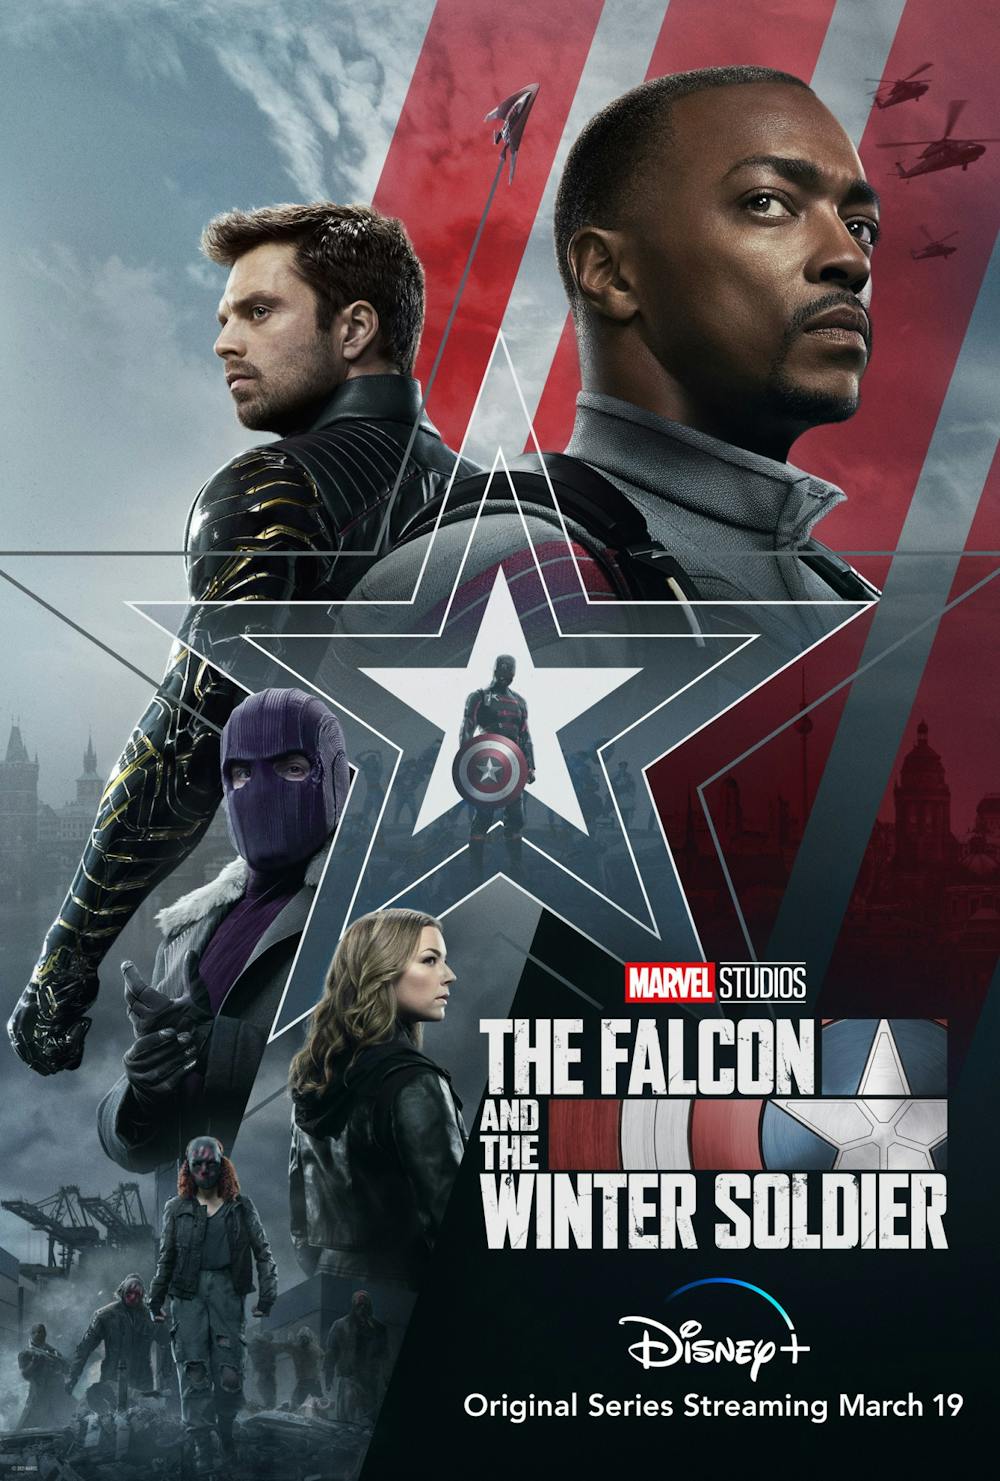 <p>With the season finale airing last Friday, “The Falcon and the Winter Soldier,” Marvel’s second Disney+ original series, represents a significant improvement over the previous series, “Wandavision,” which was bogged down by long, monotonous scenes that felt more like novelty than substance.&nbsp;</p>